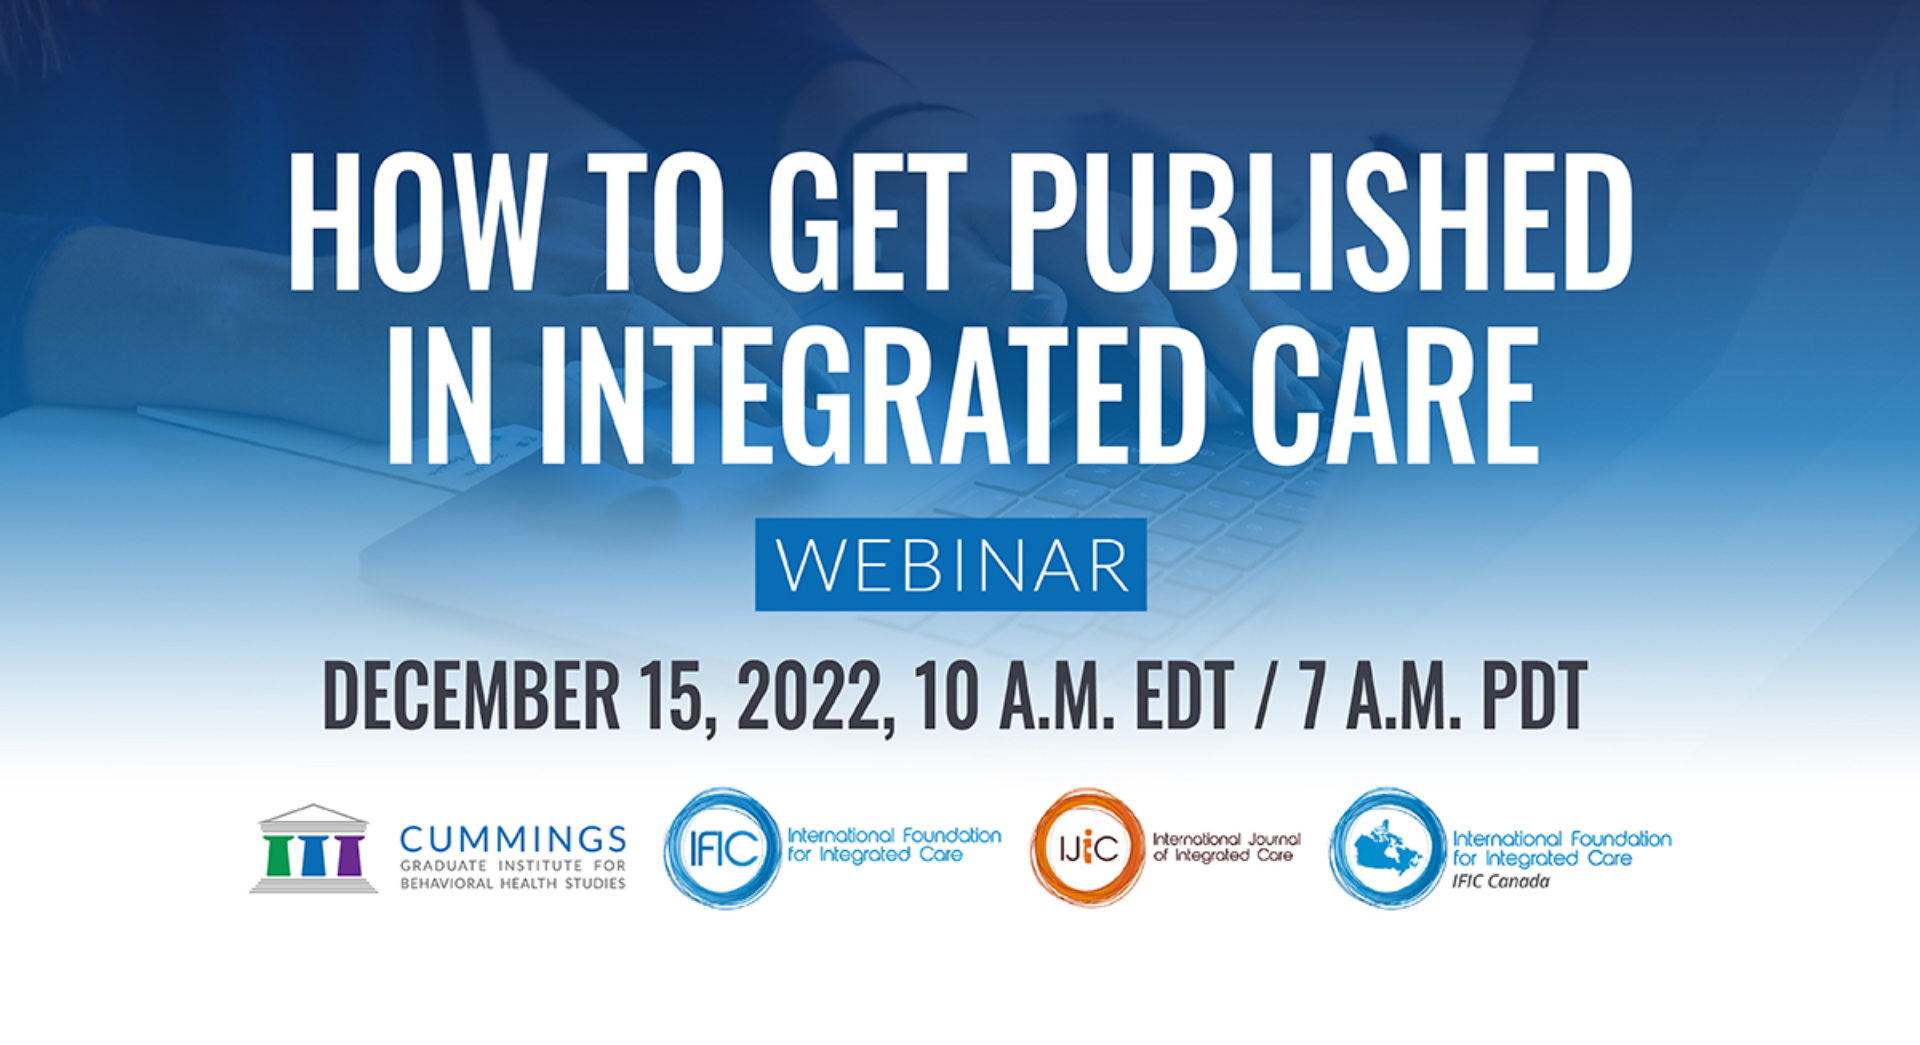 How to get published in integrated care webinar, December 15, 2022 10 am EDT/ 7 am EDT